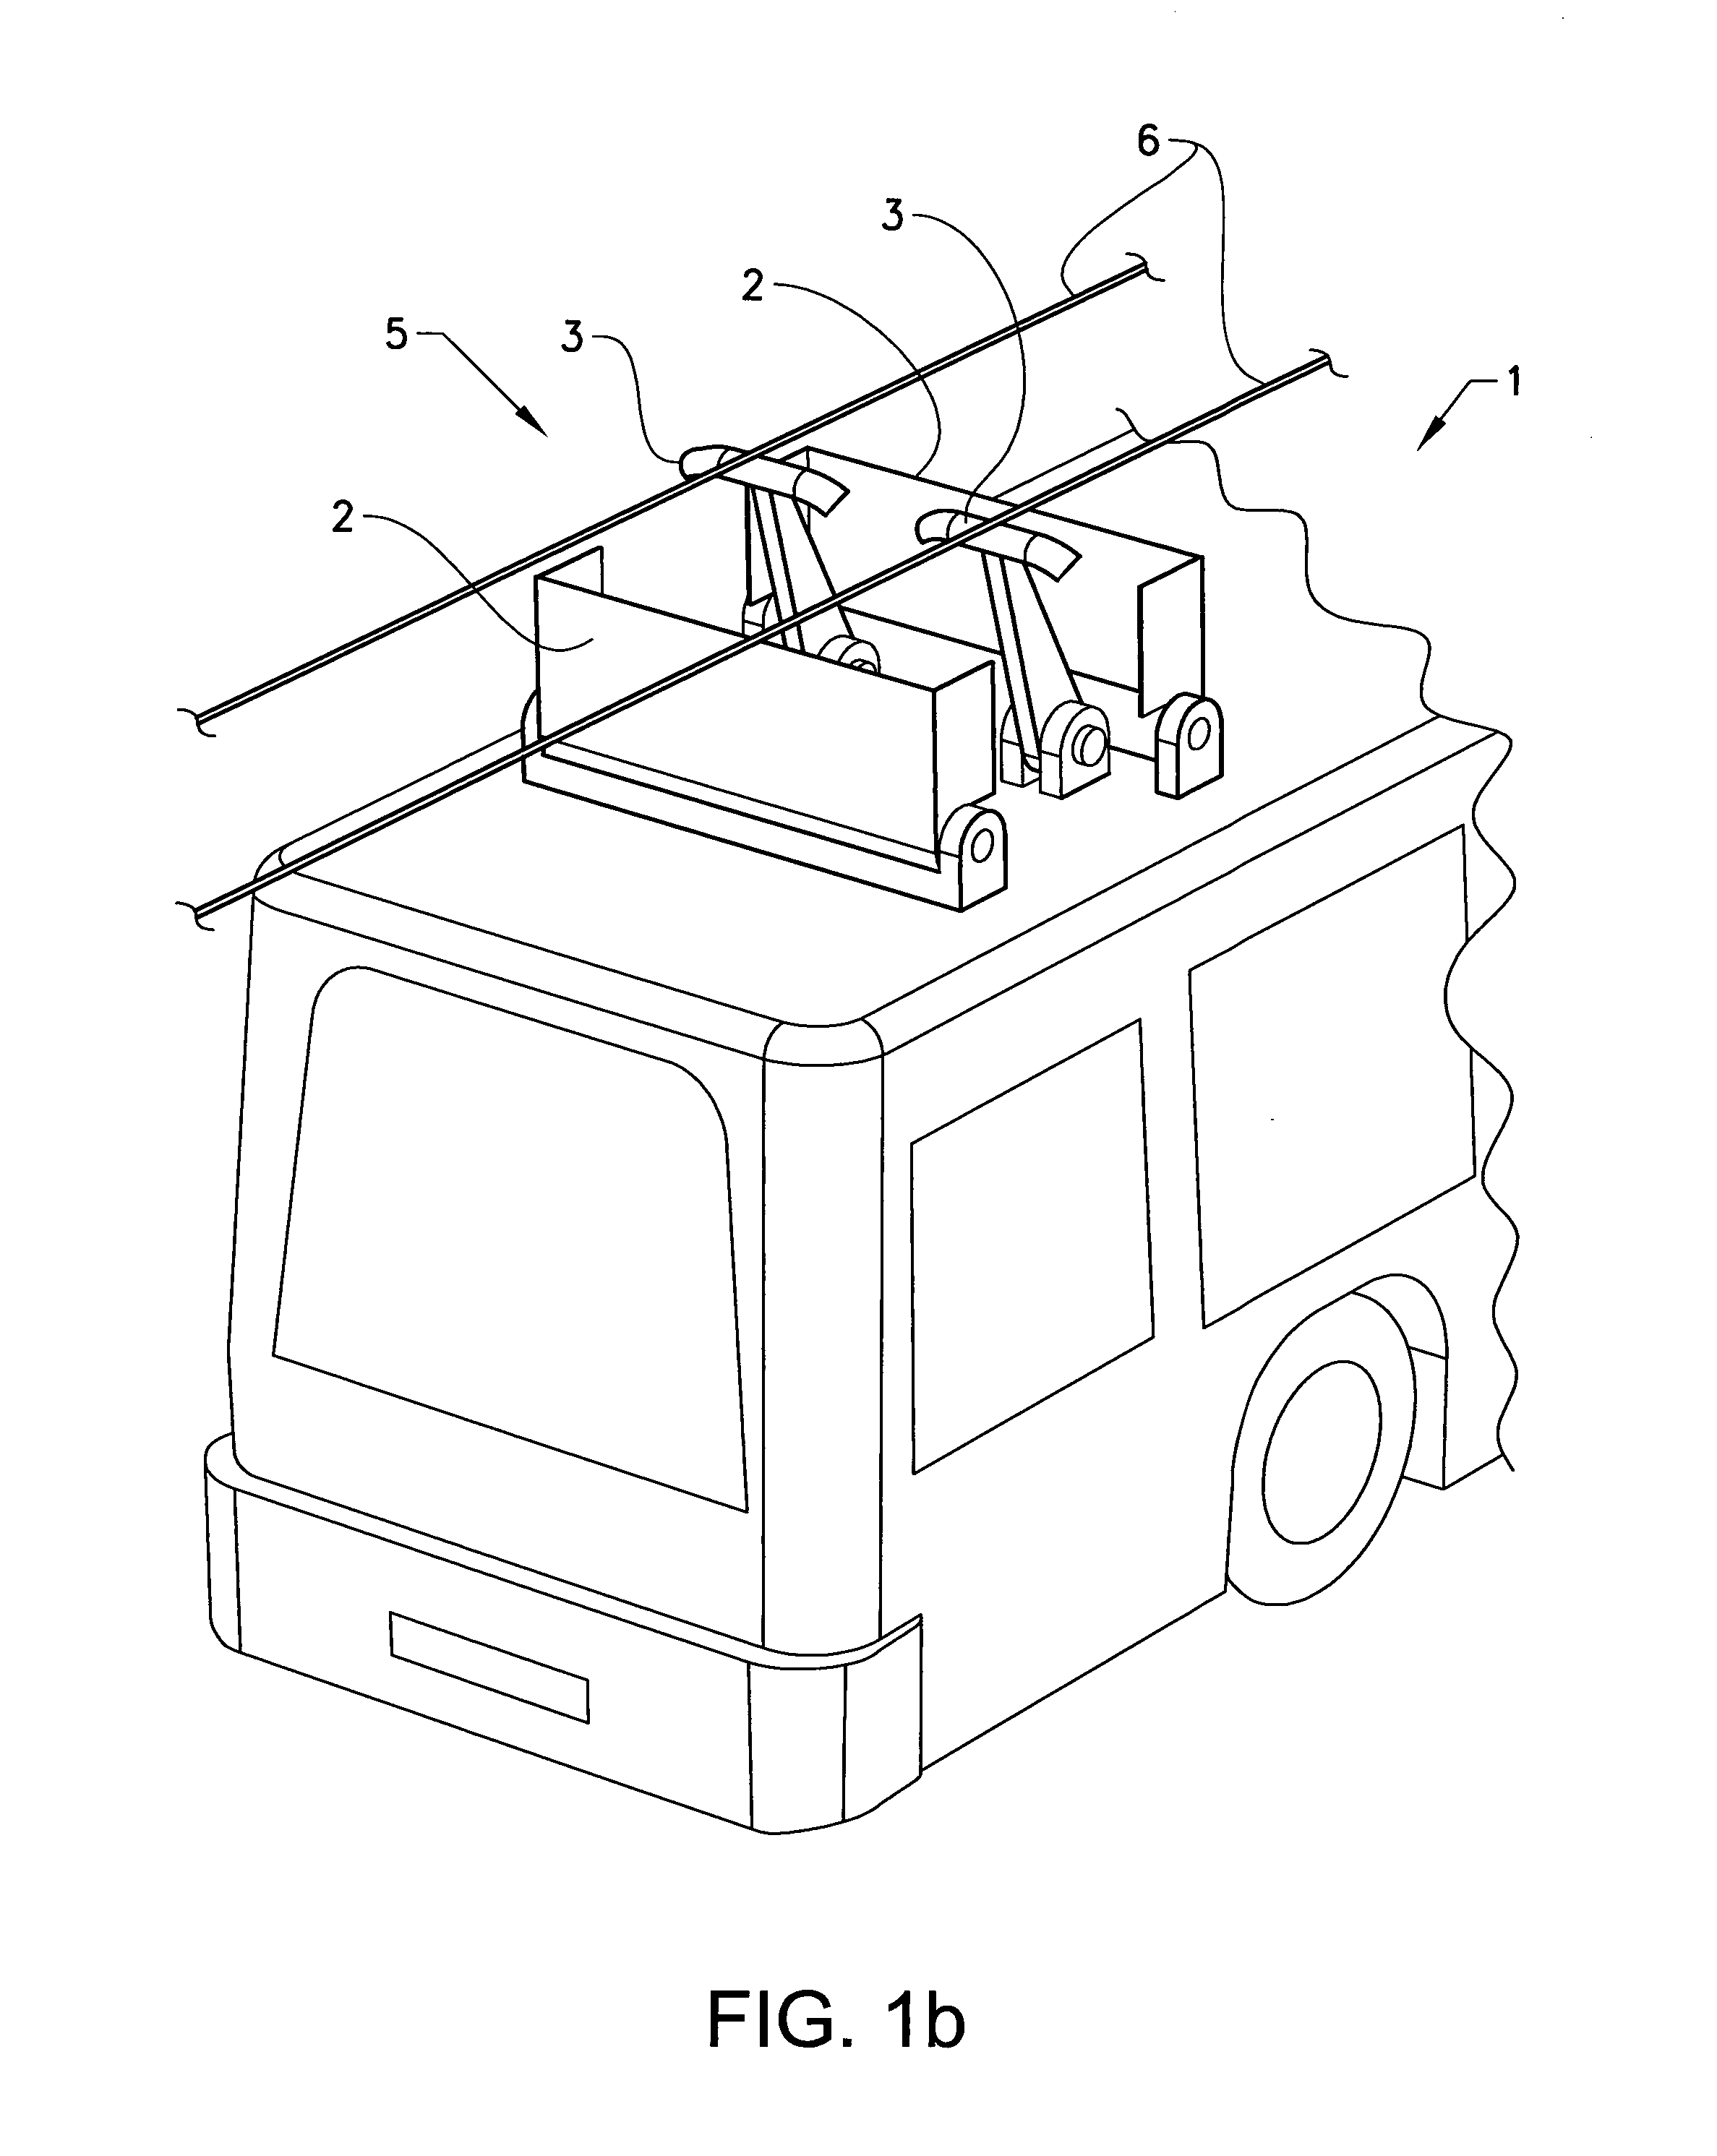 Protection arrangement for an electric vehicle